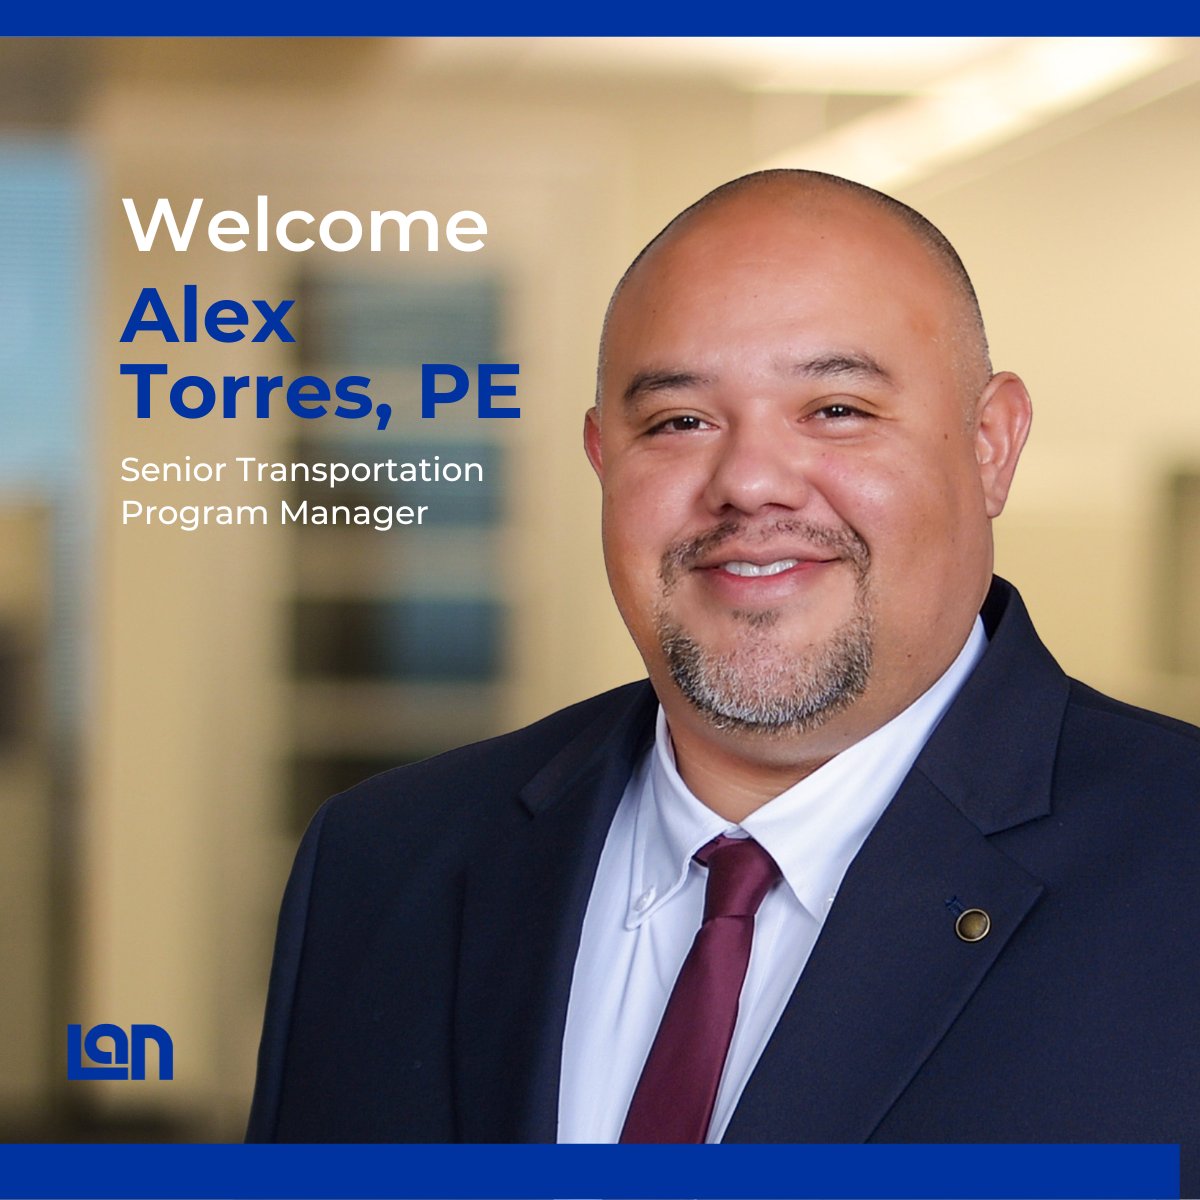 Join us in welcoming Alex Torres, PE, to LAN's Transportation team! Based in our San Antonio office, Alex will lead roadway design teams focusing on enhancing the overall quality of transportation projects and guiding overall technical development. Welcome to LAN, Alex!